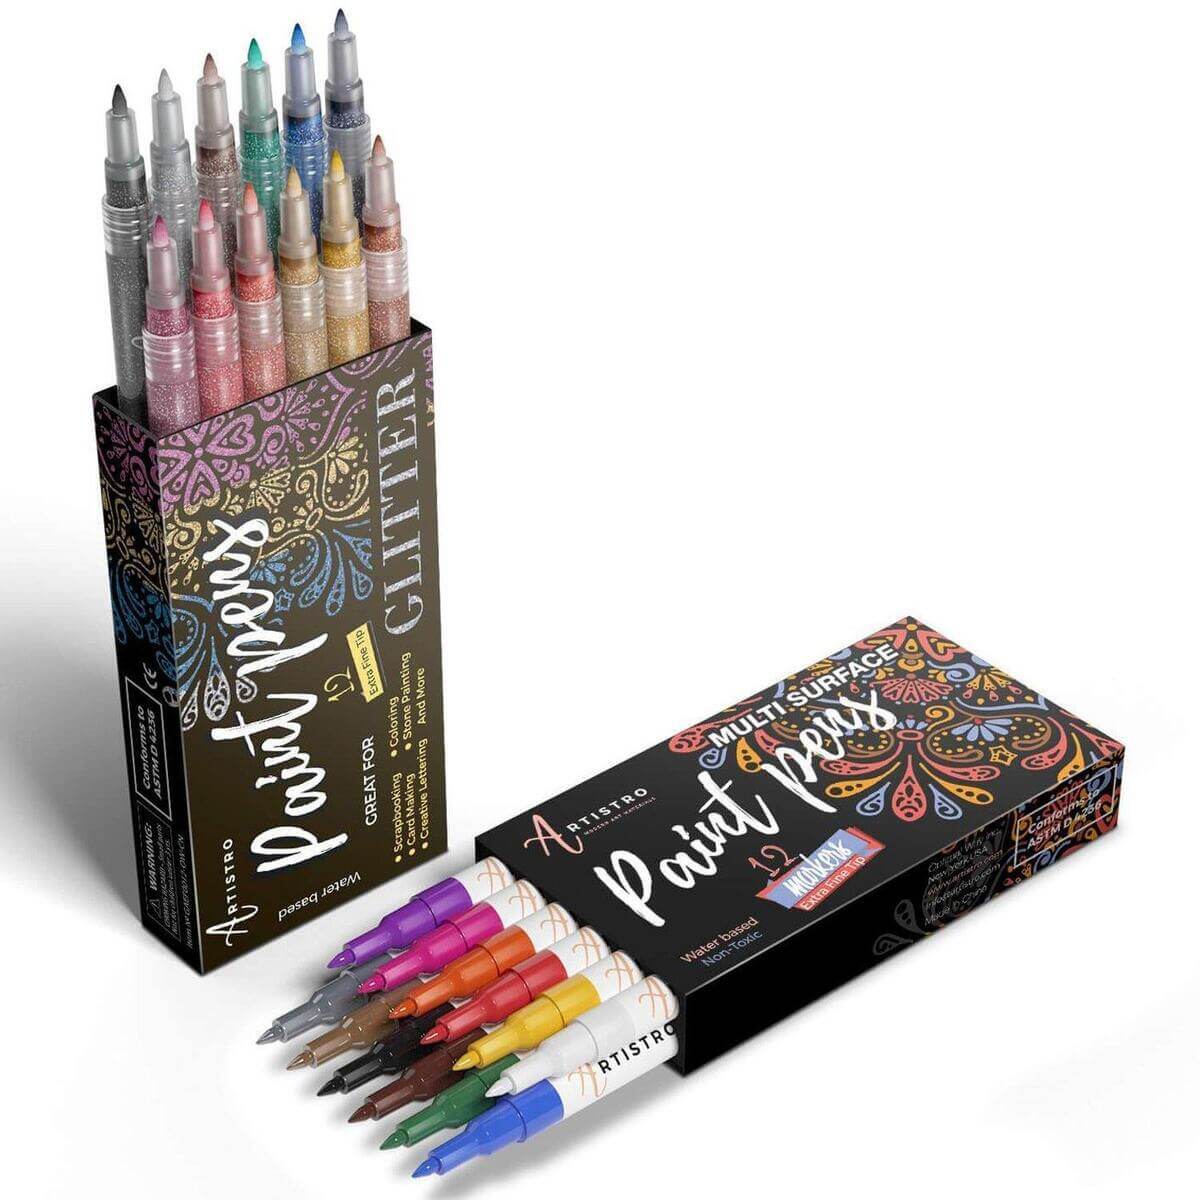 ARTISTRO Acrylic Paint Pens for Fabric, Glass, Extra Fine Tip, 12 Metallic Paint Markers